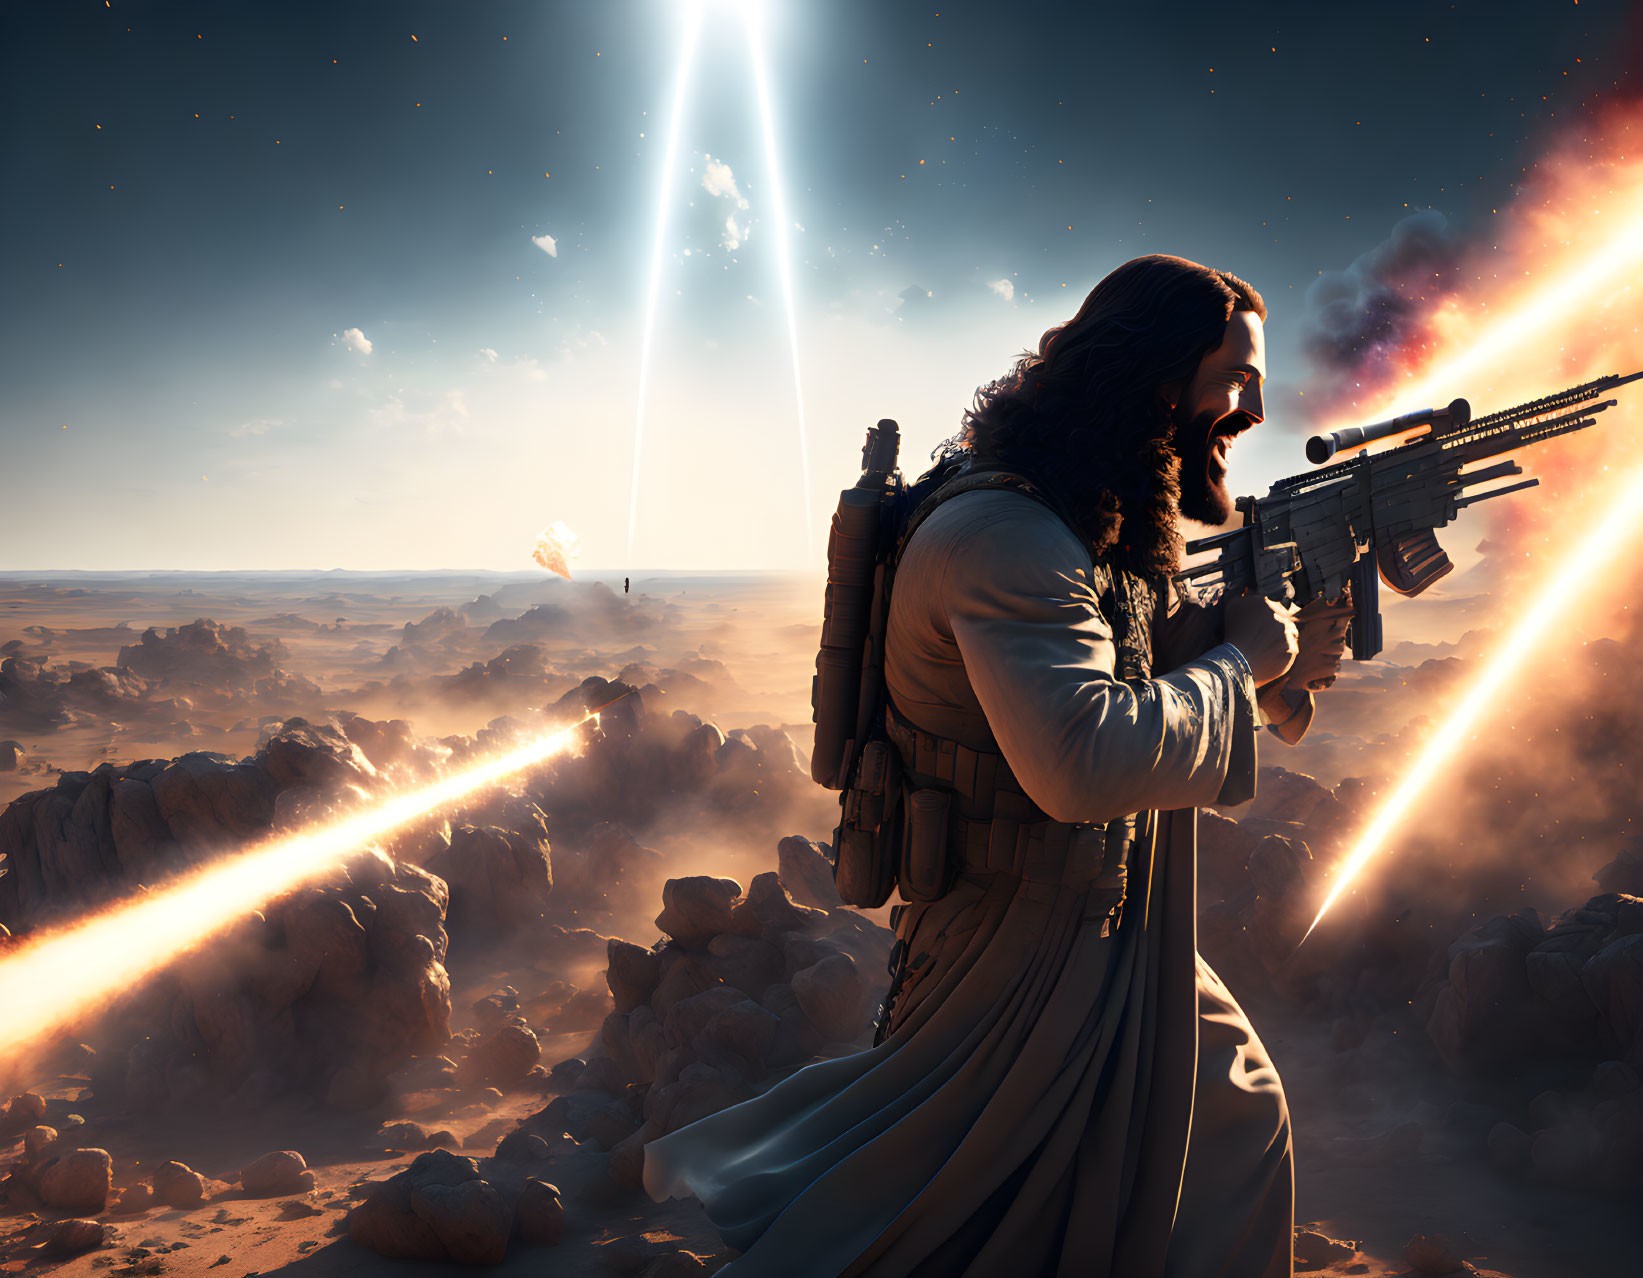 Futuristic scene: Figure in white robe with rifle in rocky desert observing distant explosion near spacecraft